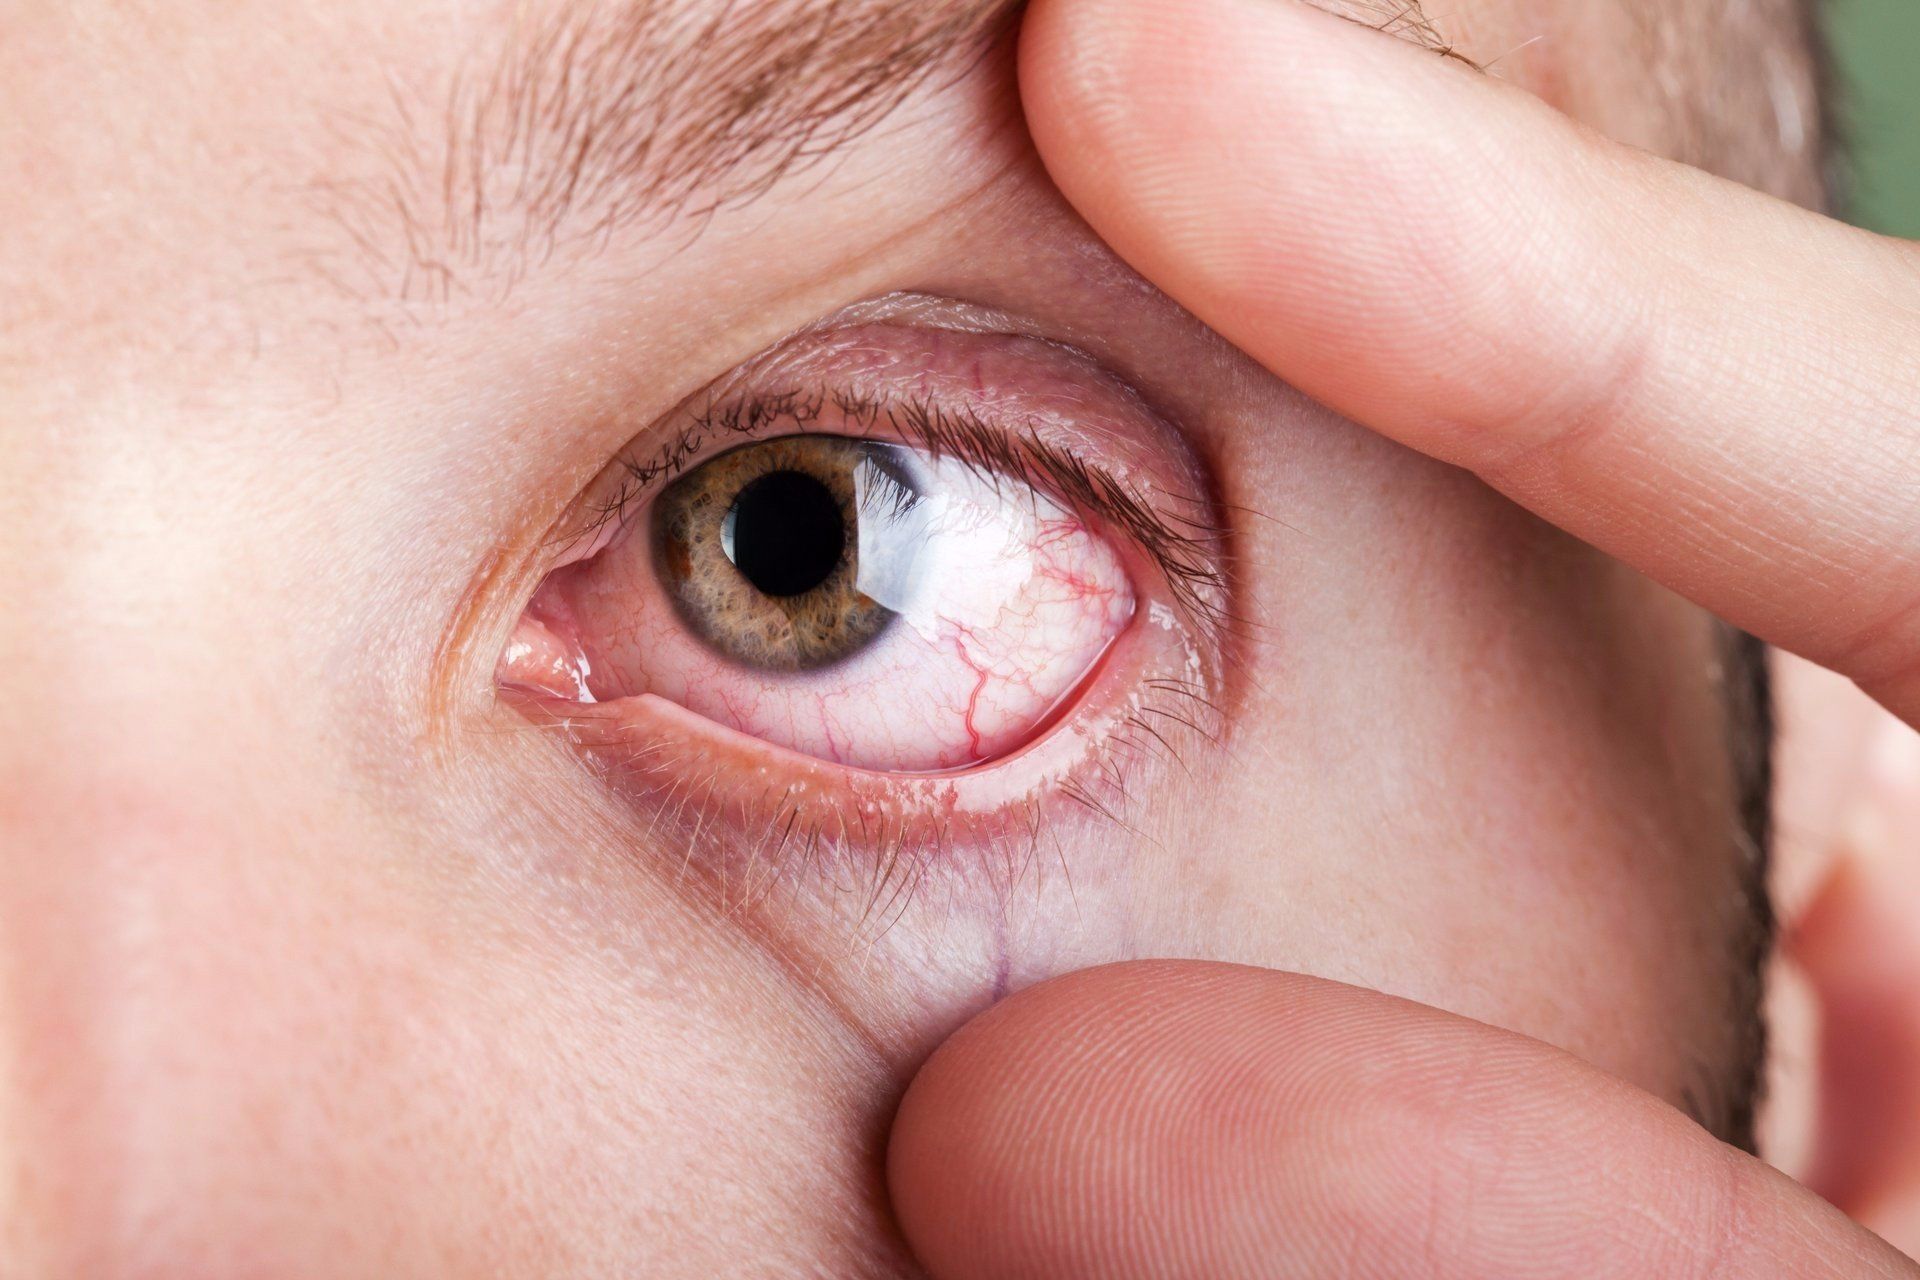 a close up of a person's red eye